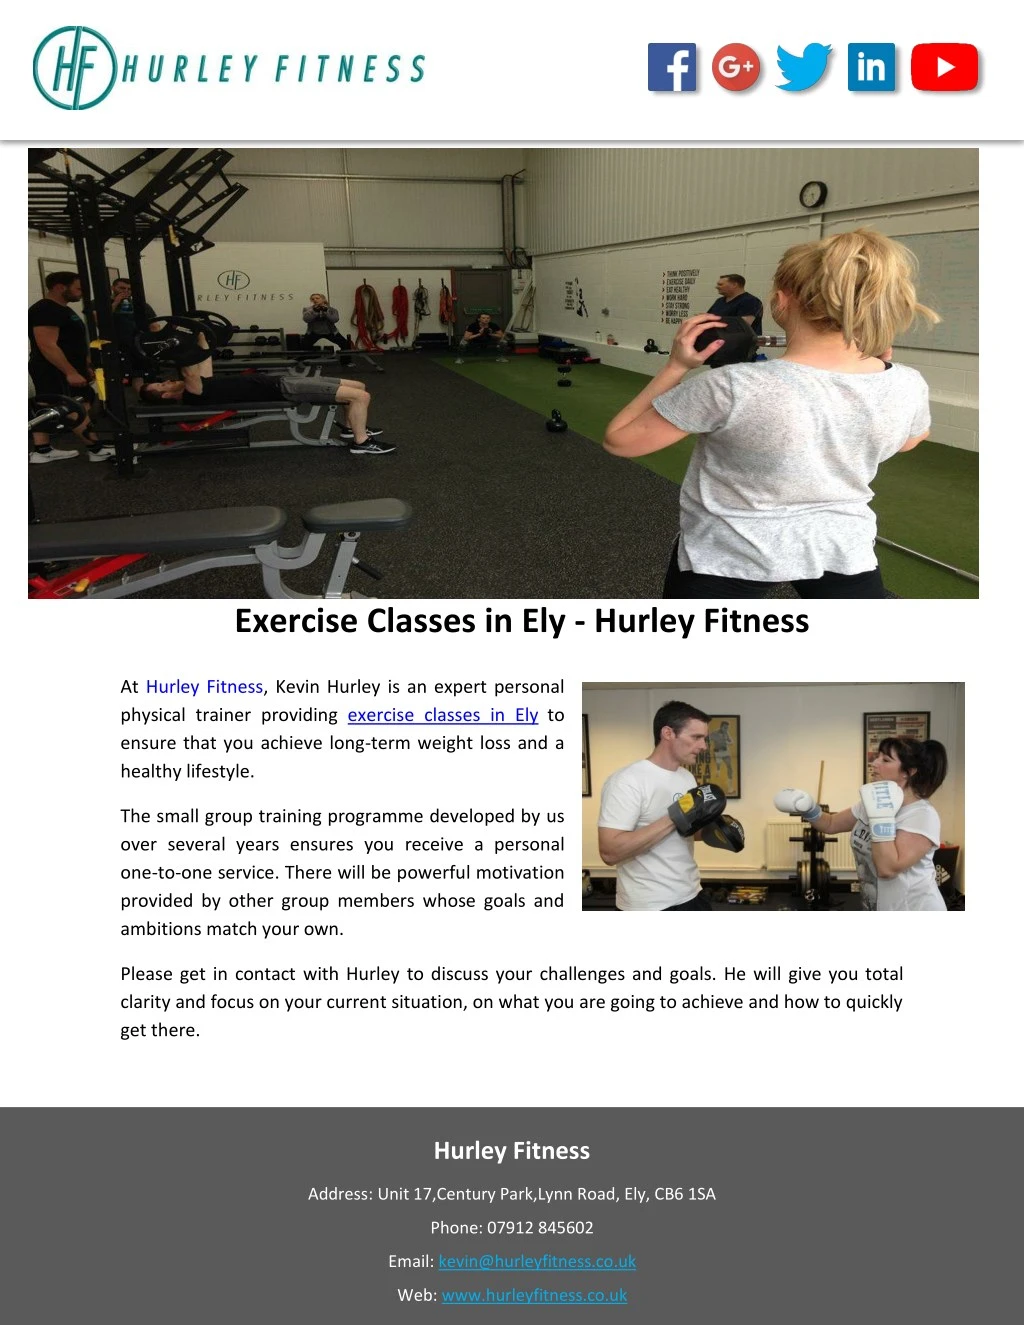 at hurley fitness kevin hurley is an expert